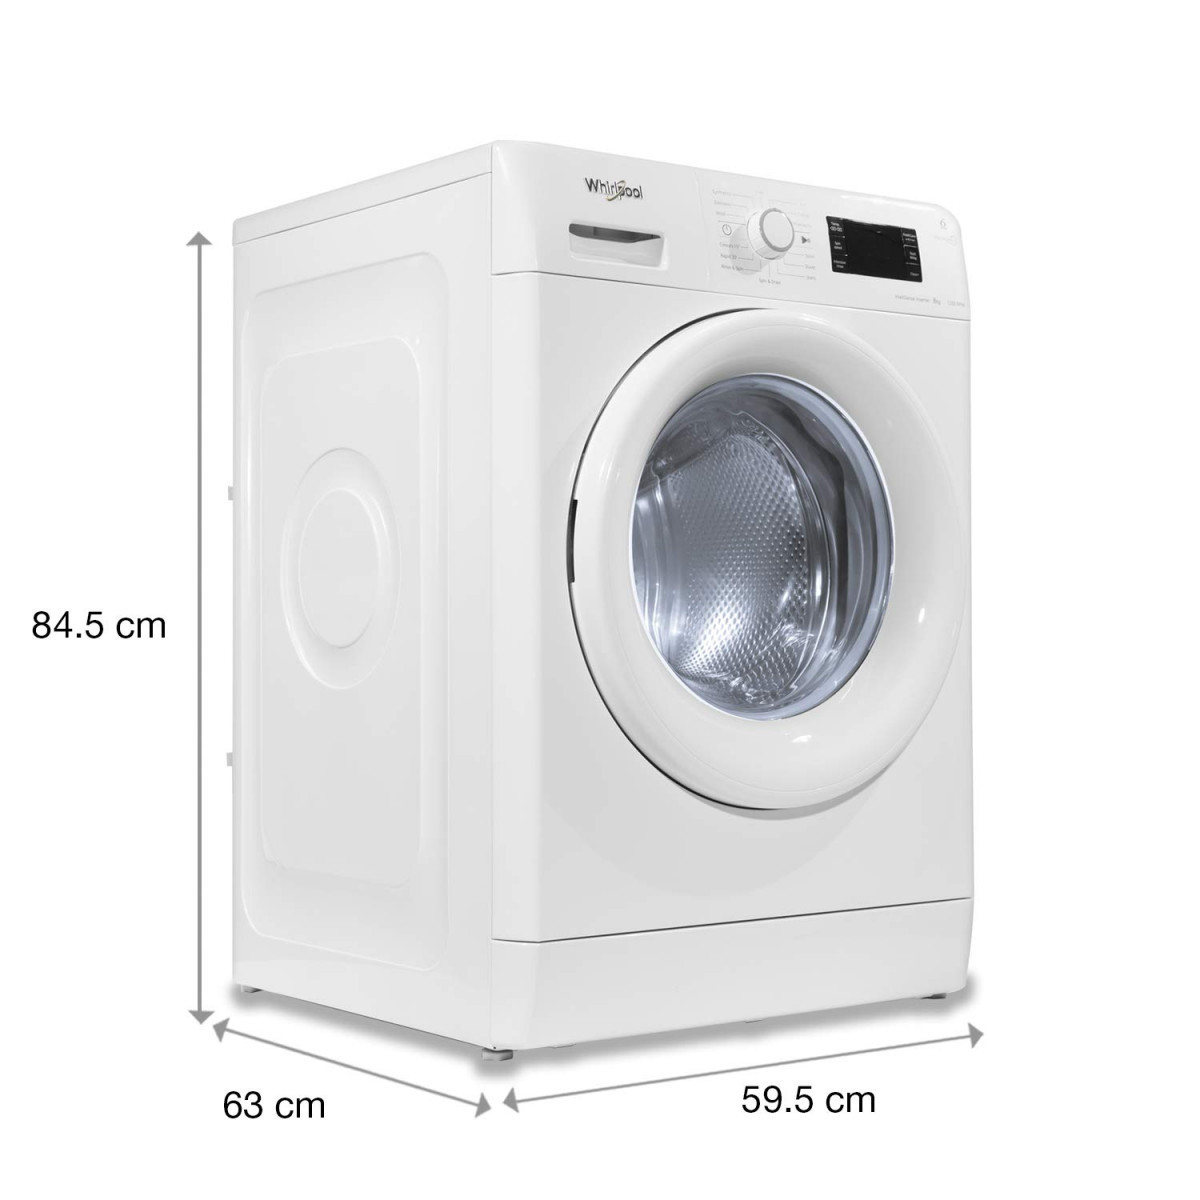 Whirlpool 8 kg Inverter Fully Automatic Front Load Washing Machine Appliance Fresh Care 8212 White Inbuilt Heater